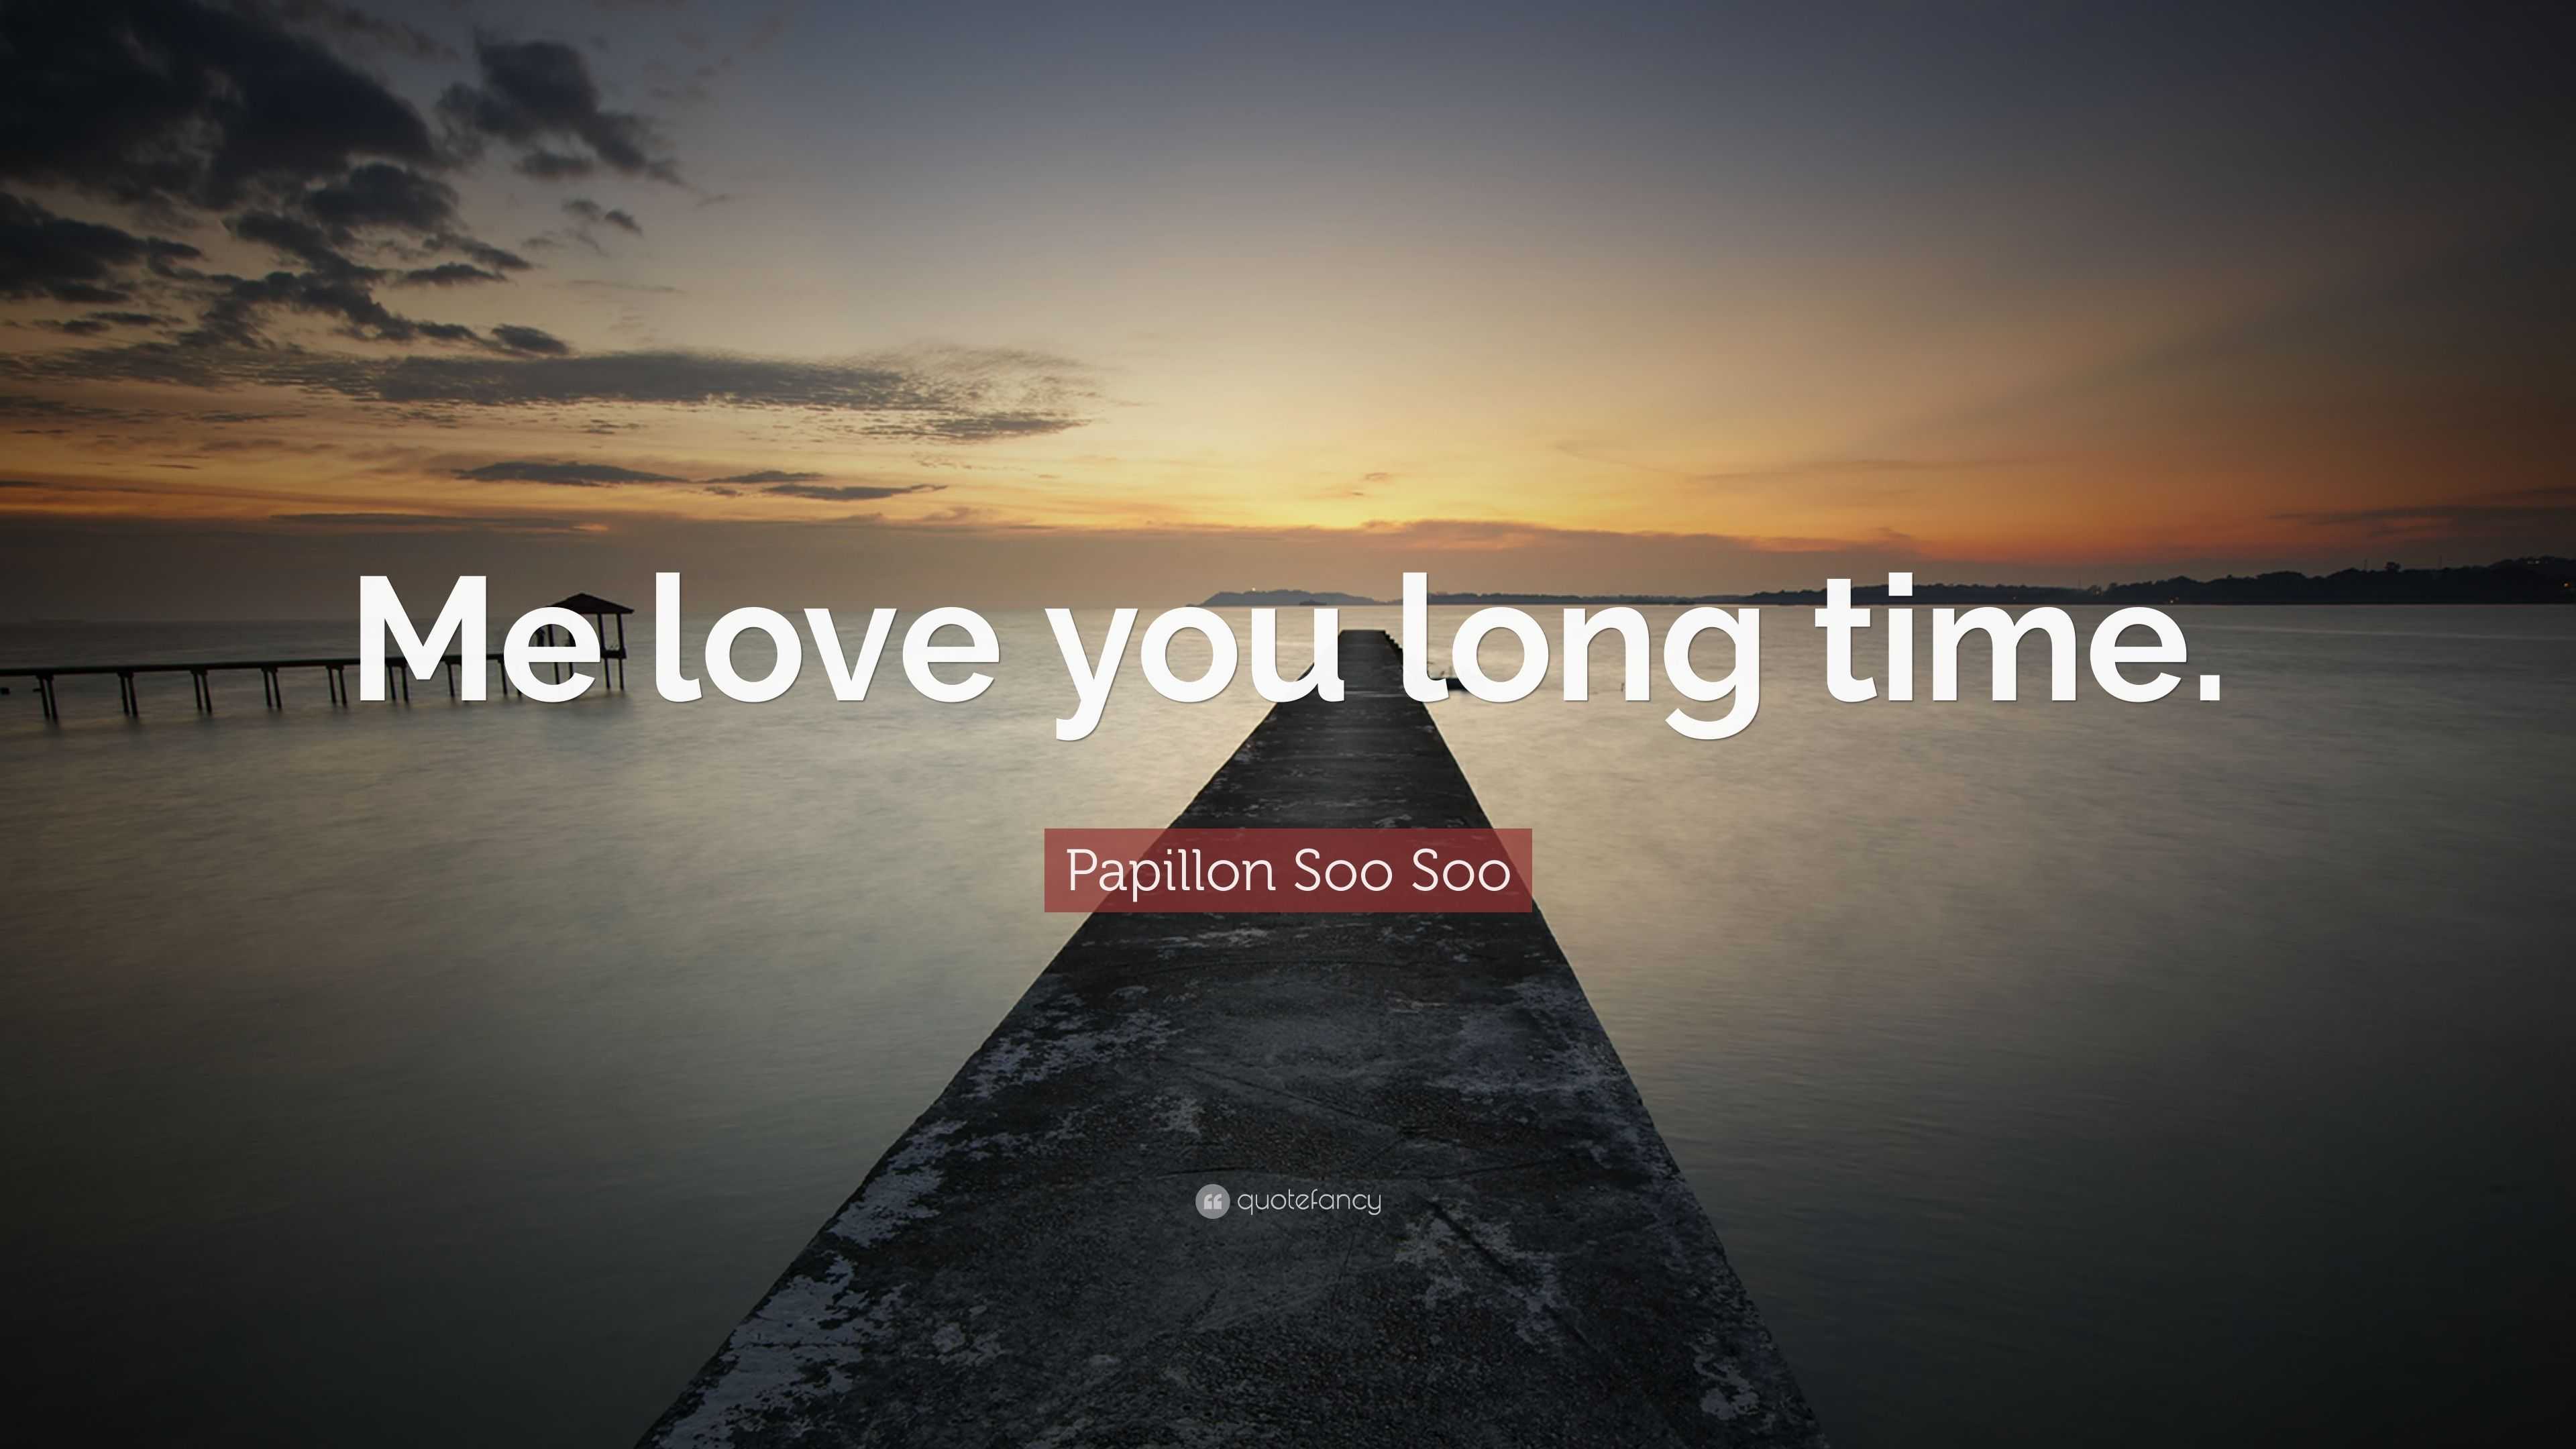 Papillon Soo Soo Quote “Me love you long time ”